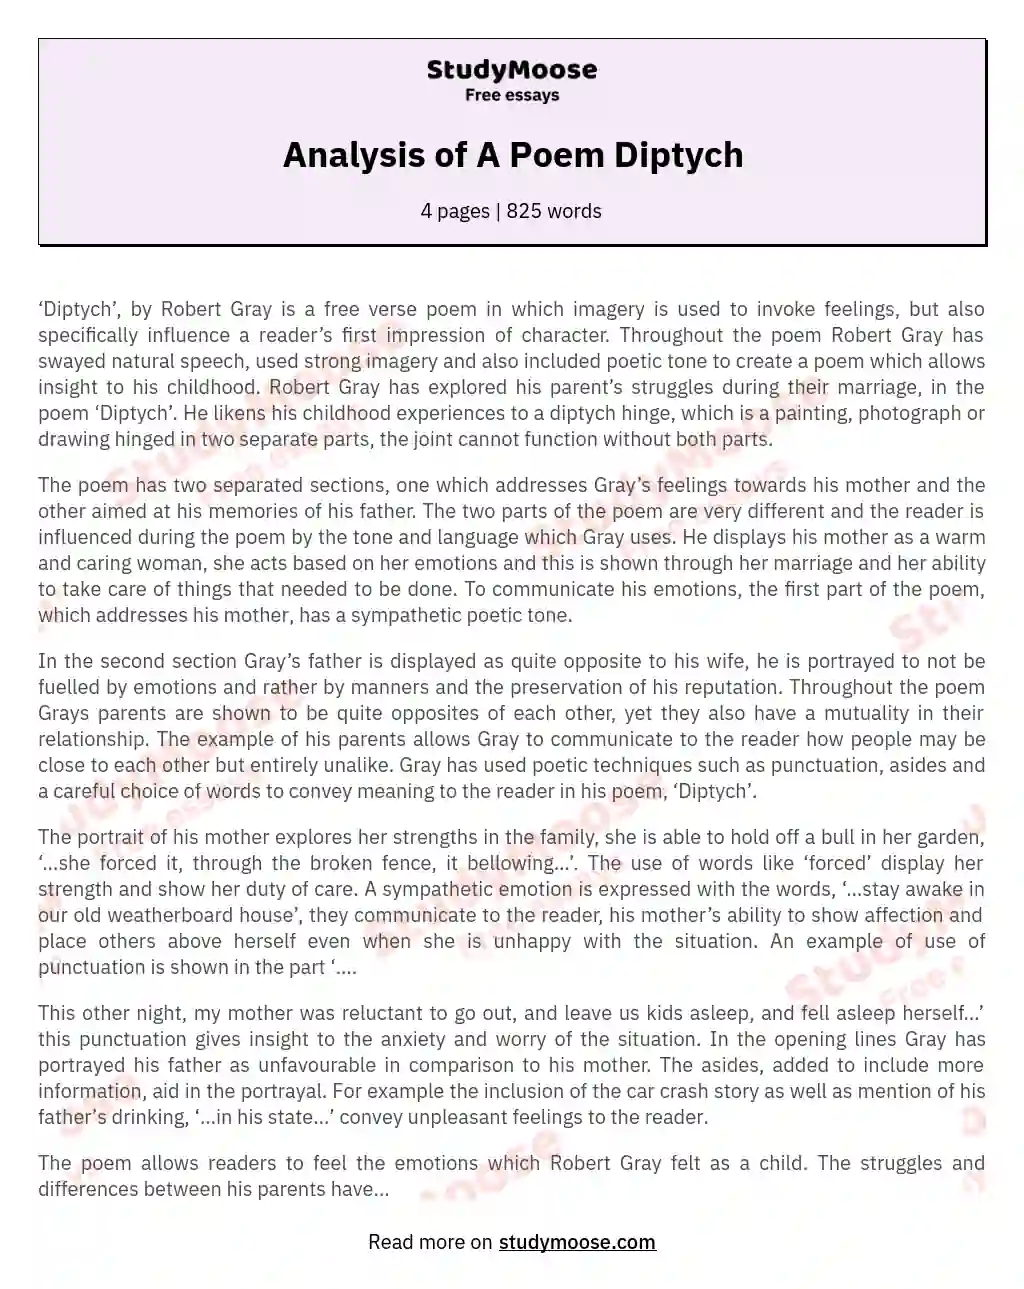 Analysis of A Poem Diptych essay